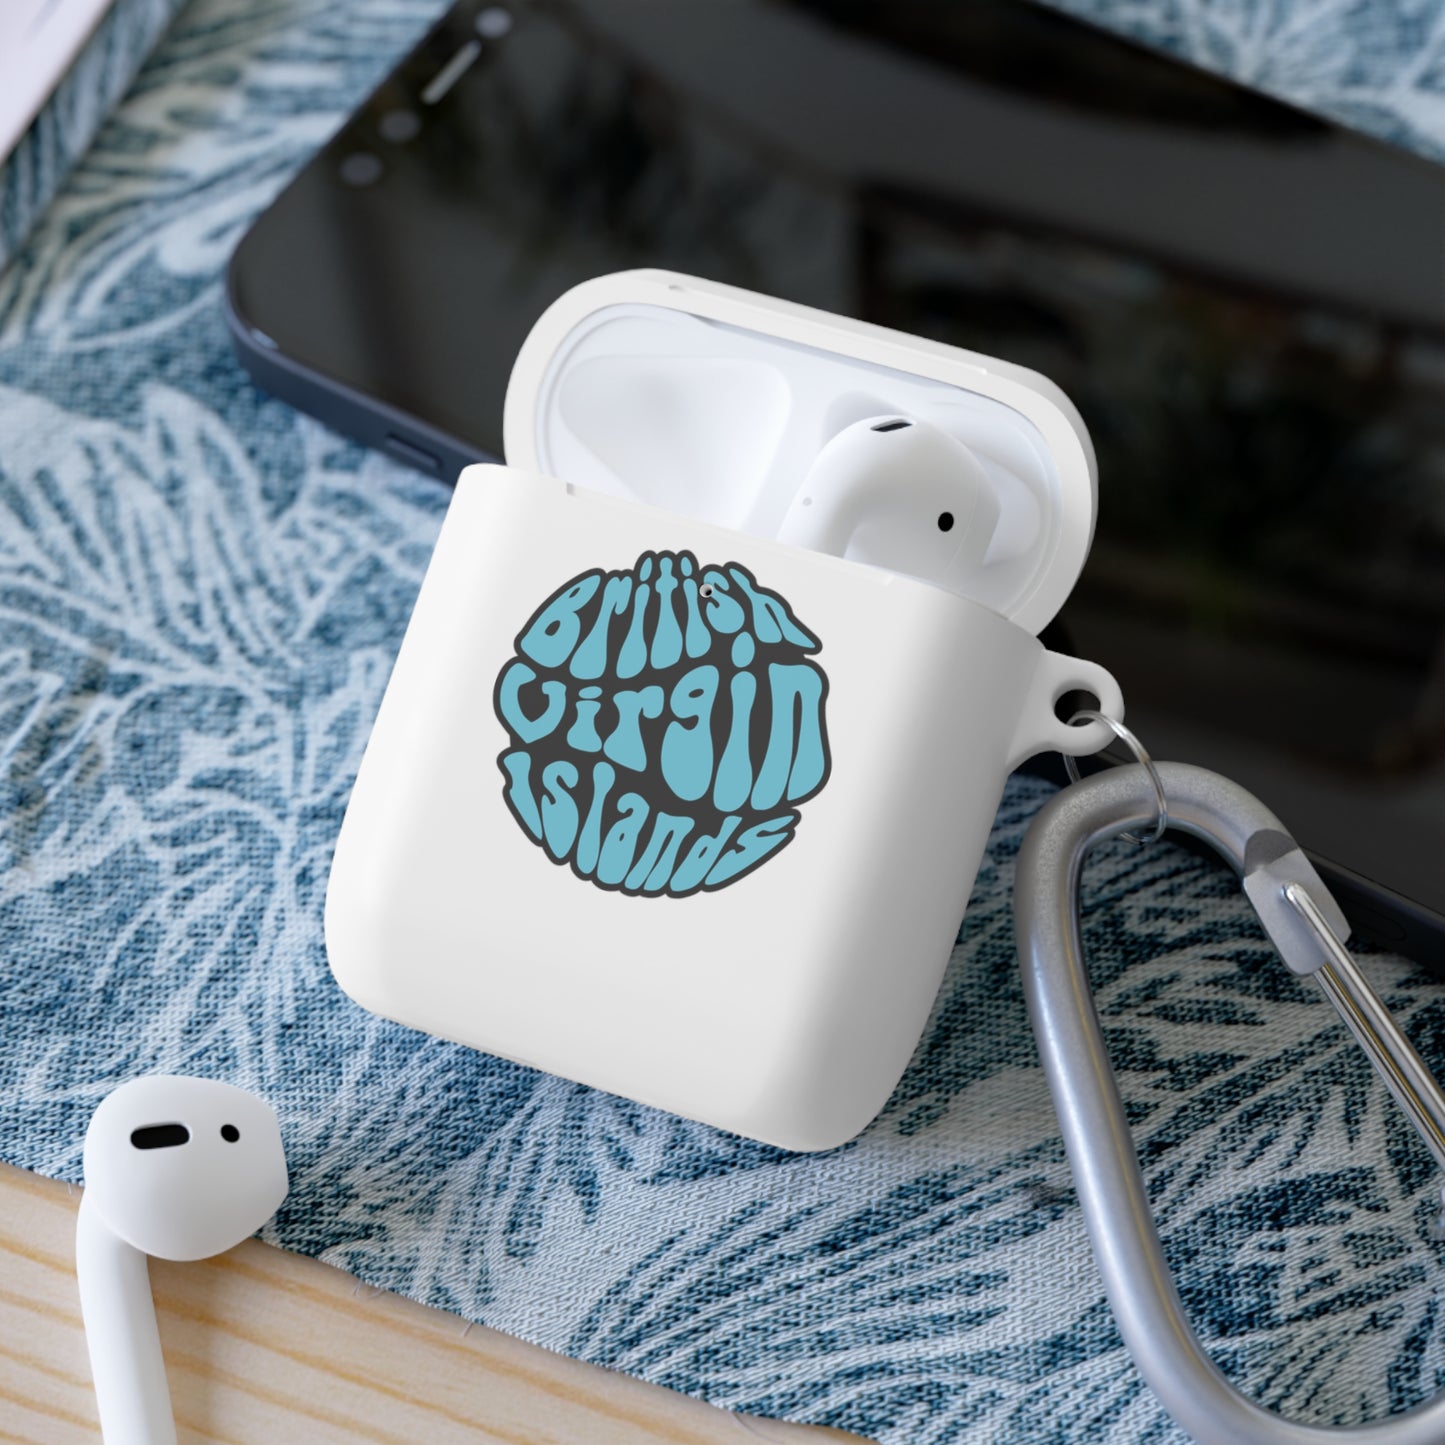 “BVI Bubble” AirPods and AirPods Pro Case Cover